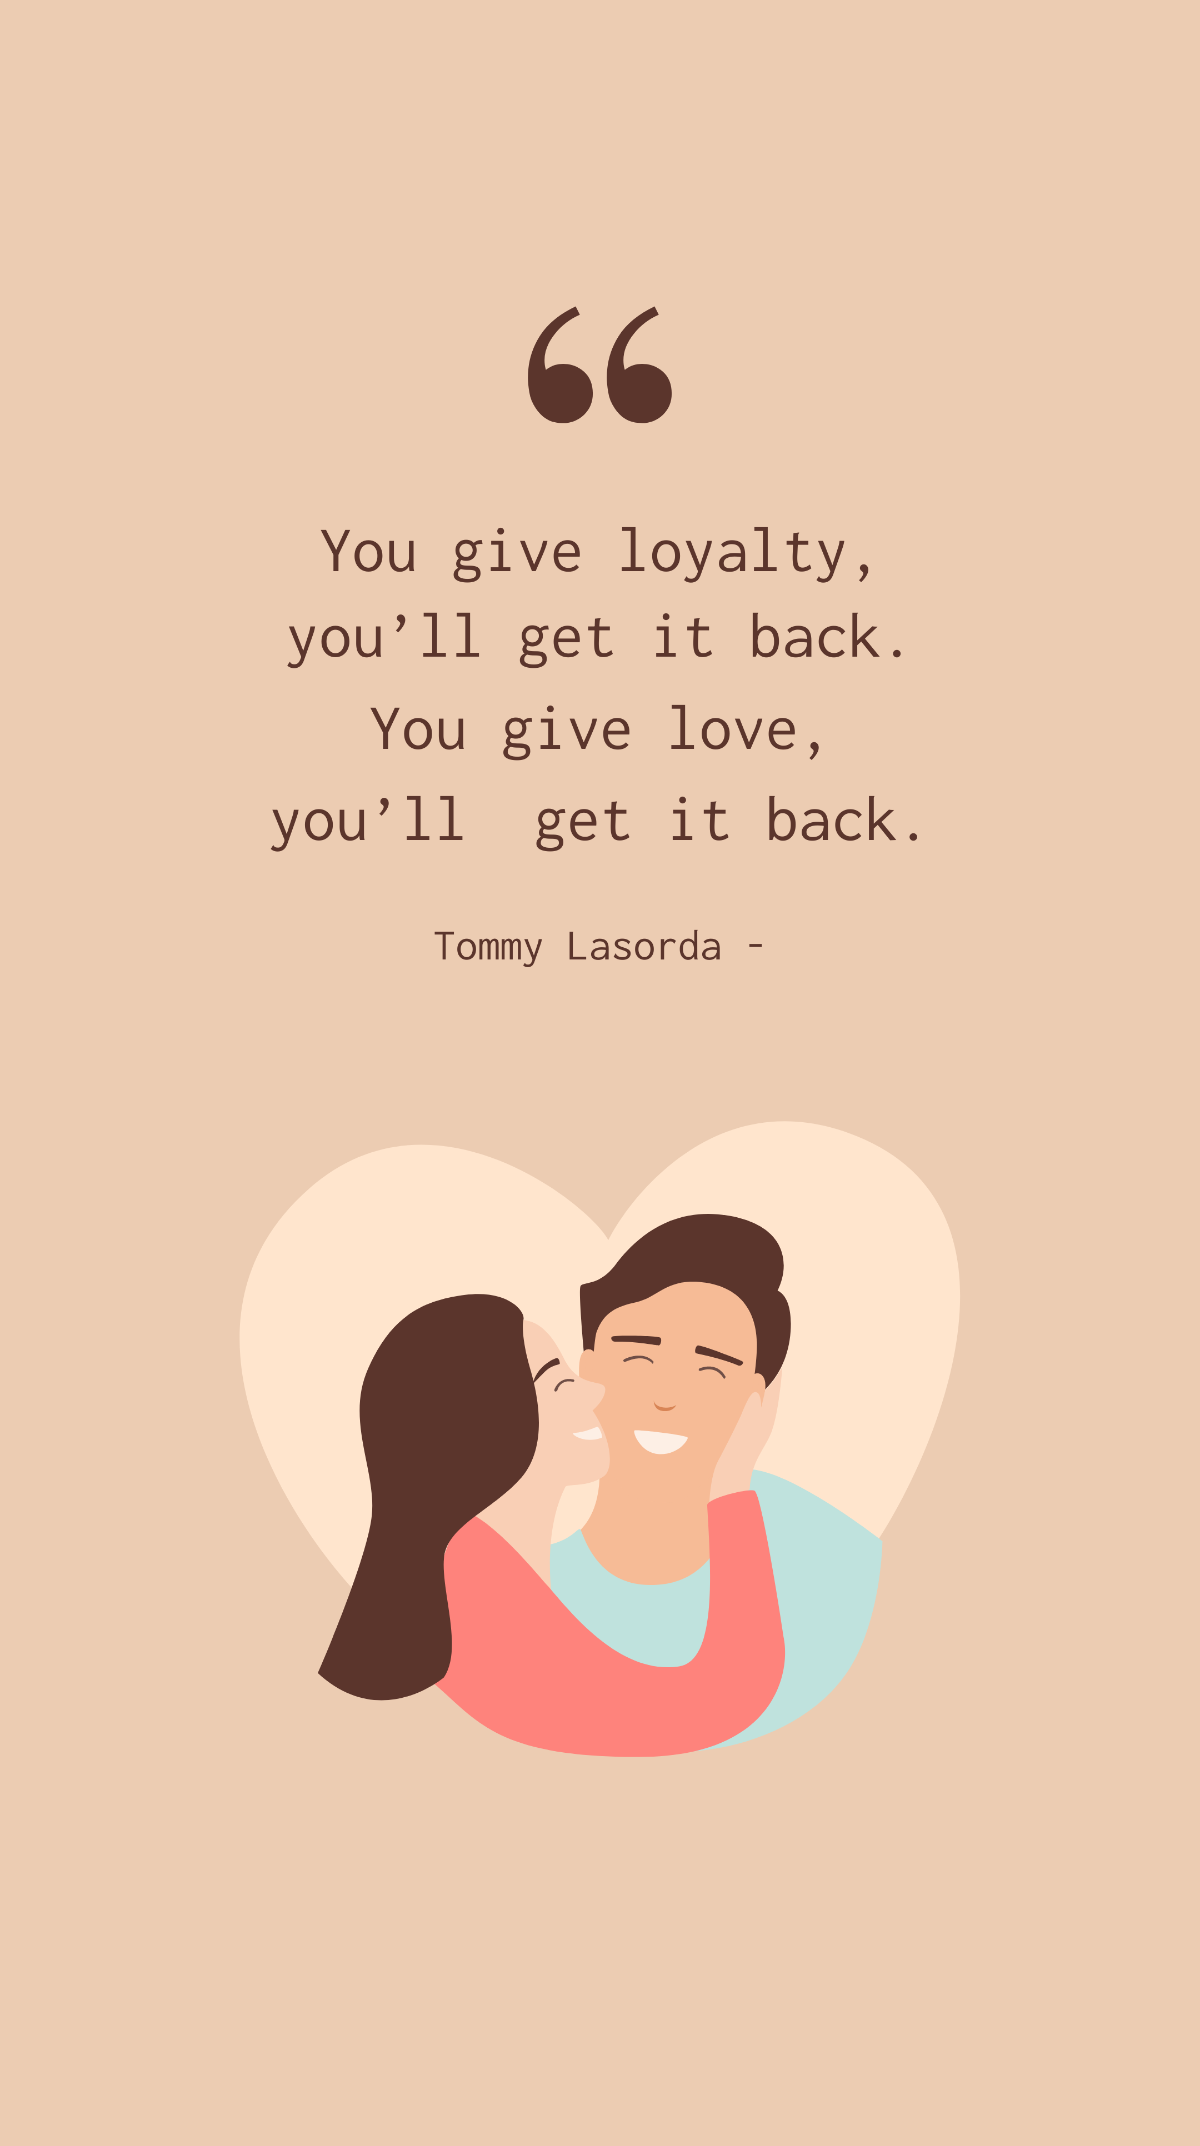 Tommy Lasorda - You give loyalty, you’ll get it back. You give love, you’ll  get it back. Template